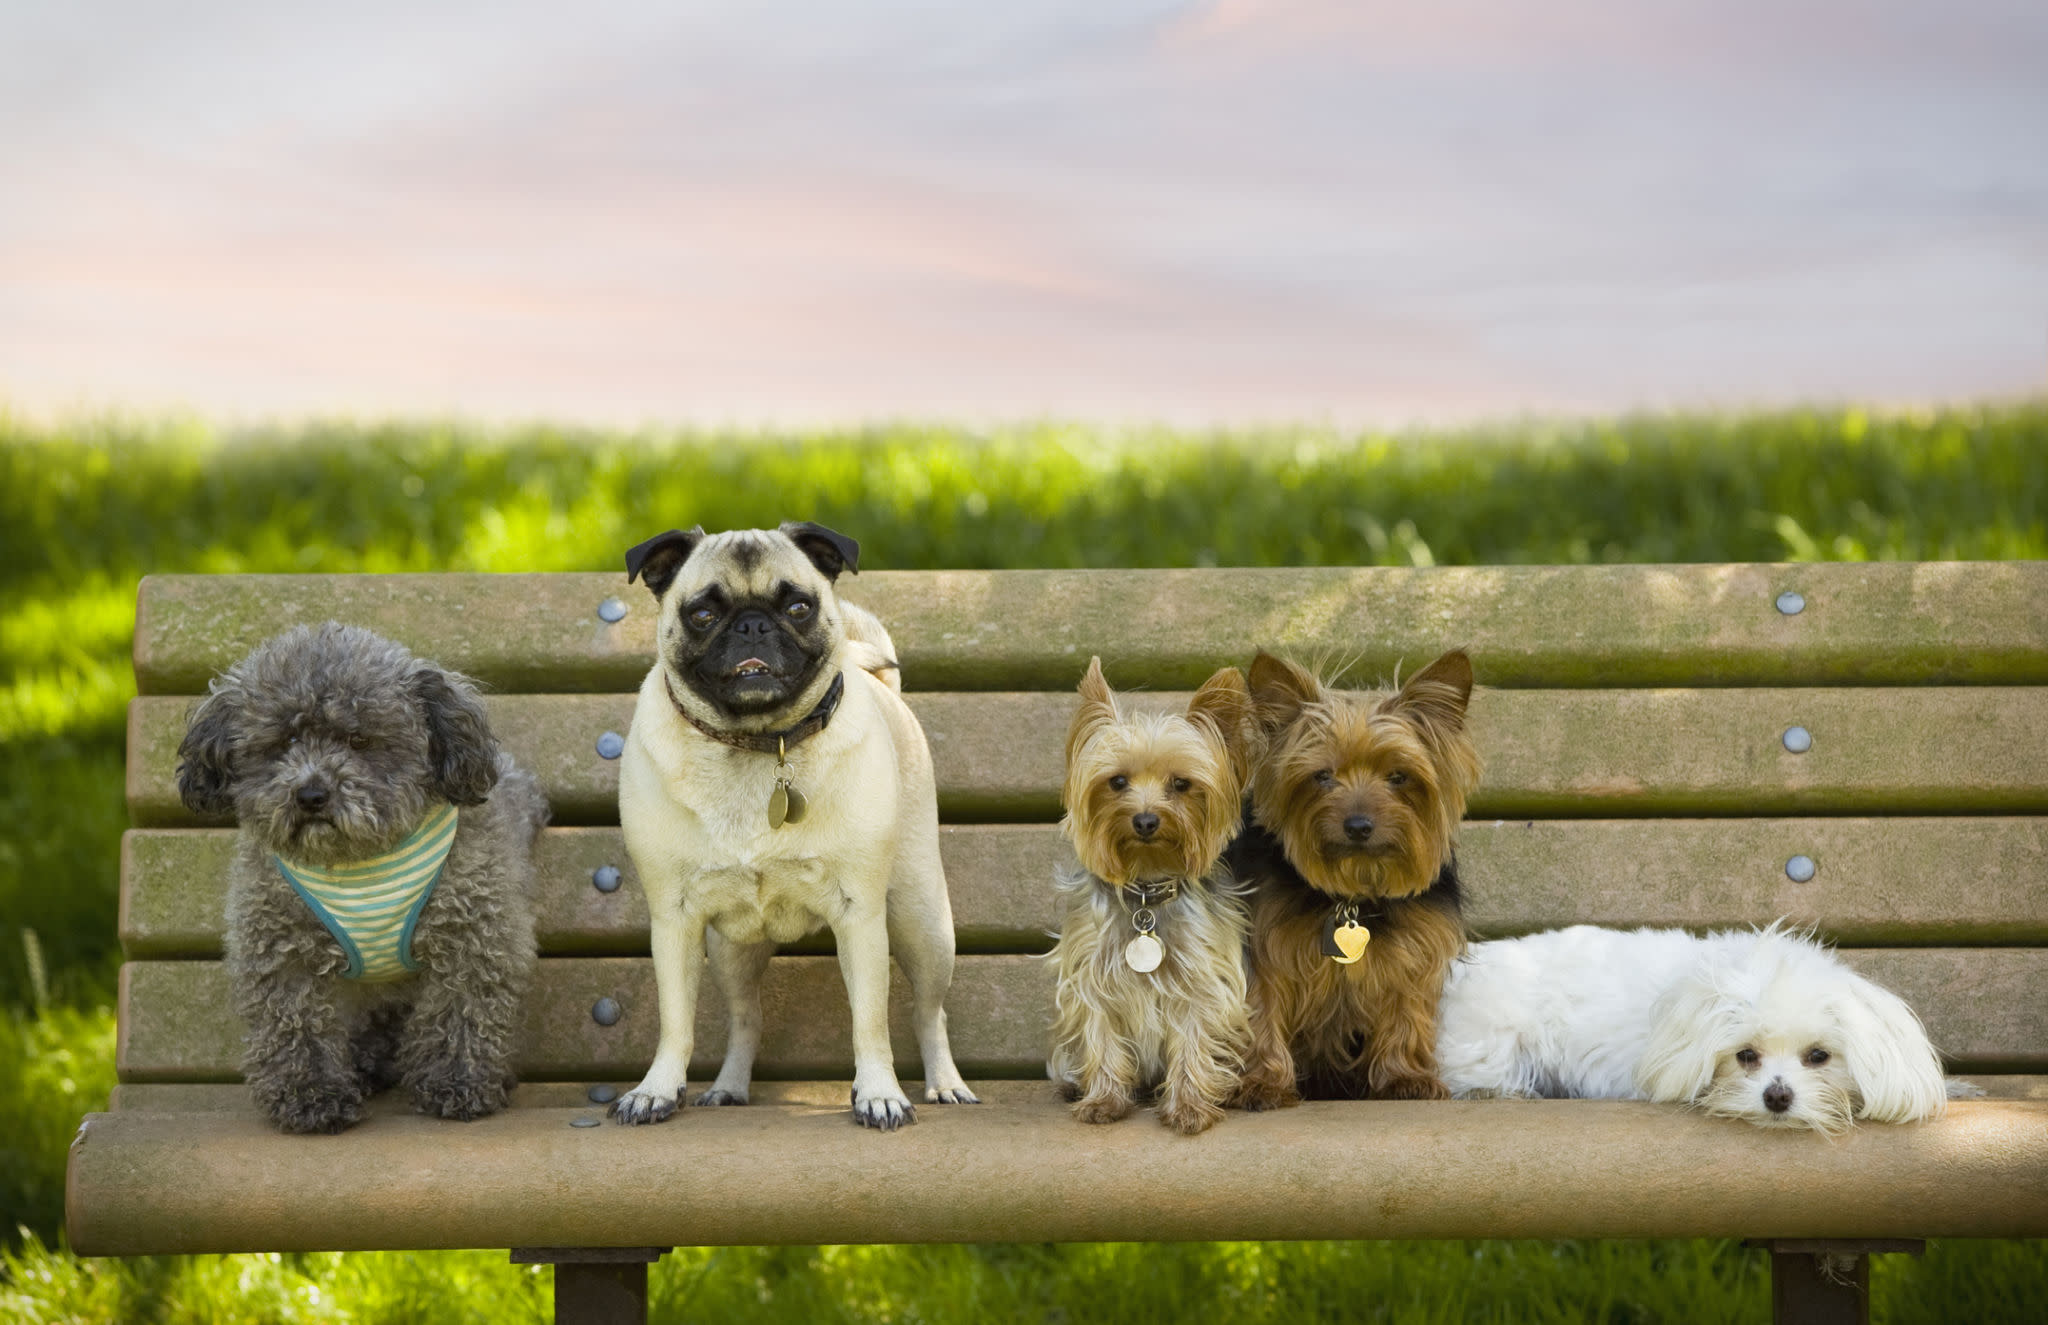 These are the top 10 most popular dog breeds in the UK, as voted for by